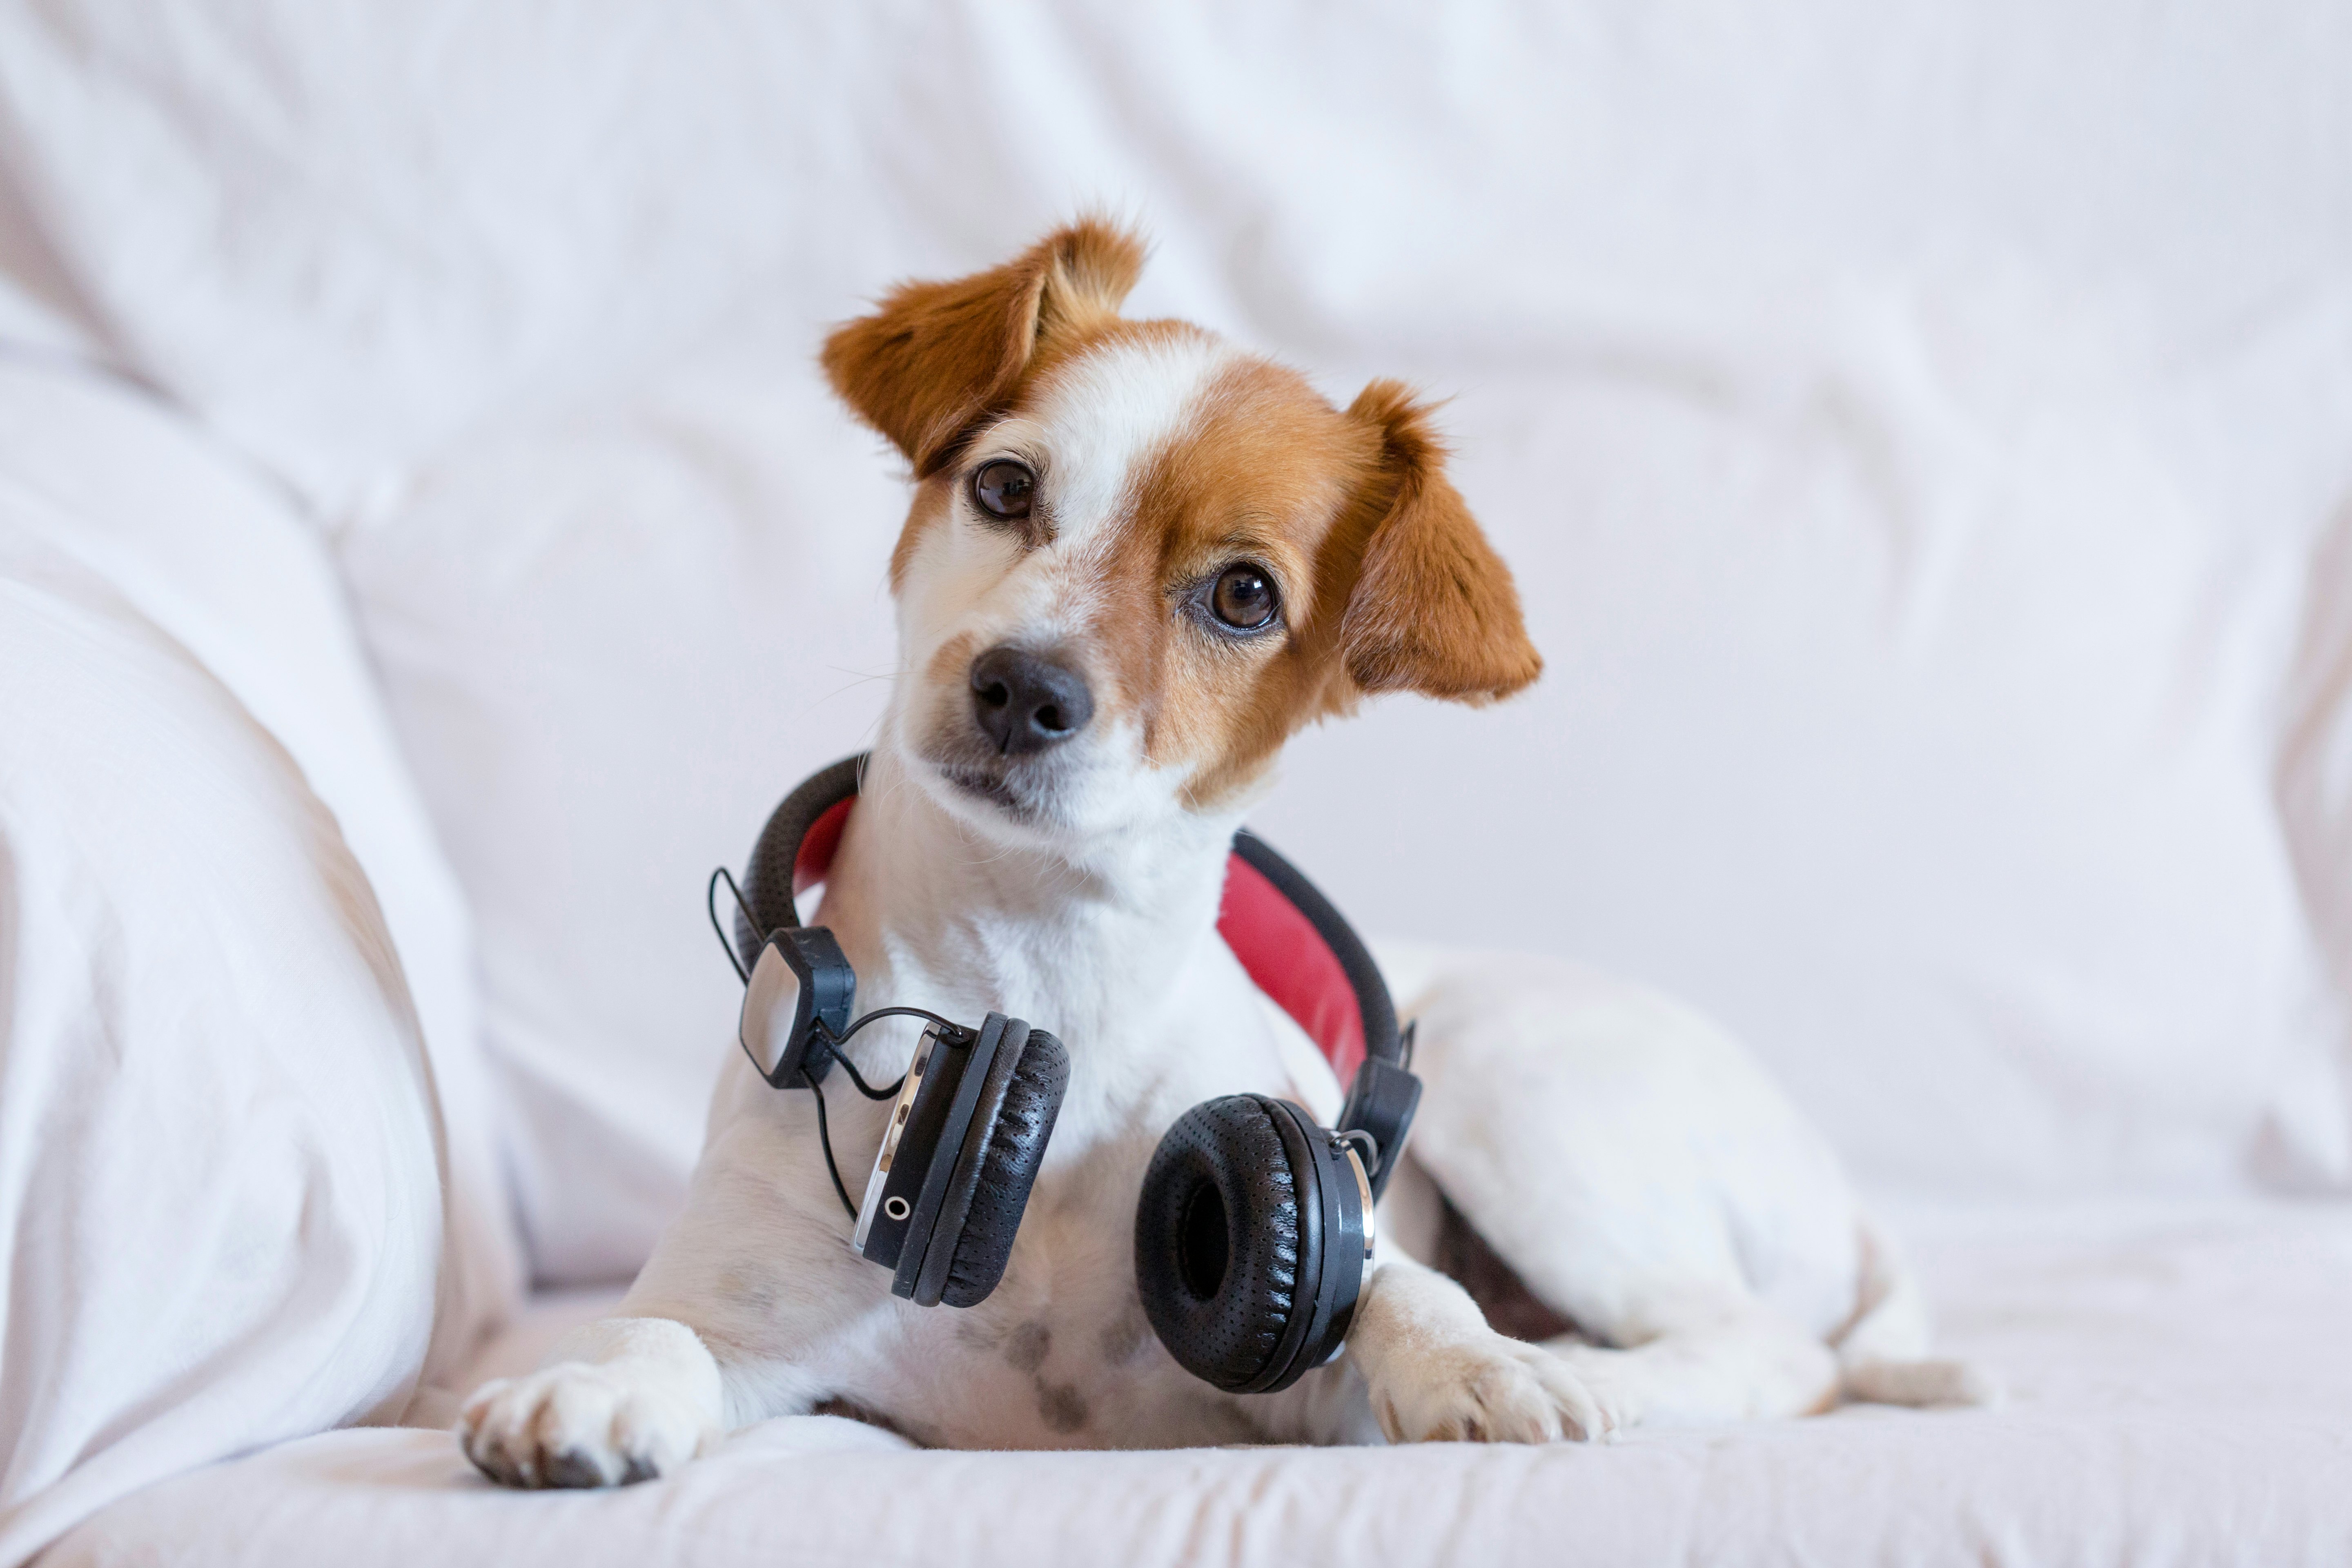 music for separation anxiety in dogs